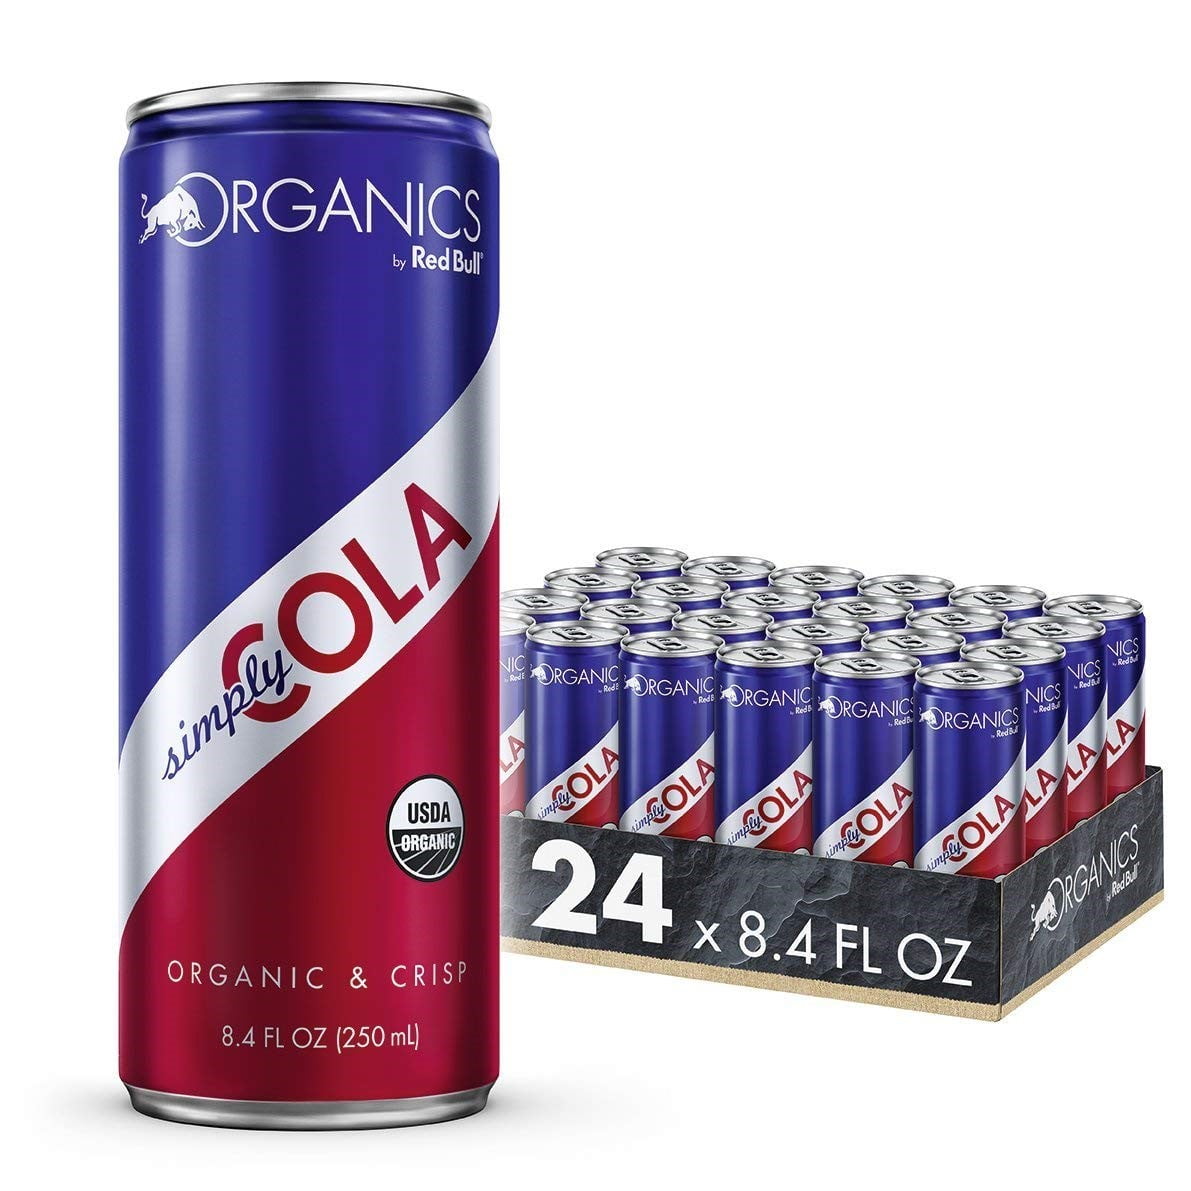 (24 Cans) Organics By Red Bull Simply Cola Mixer, 8.4 fl oz